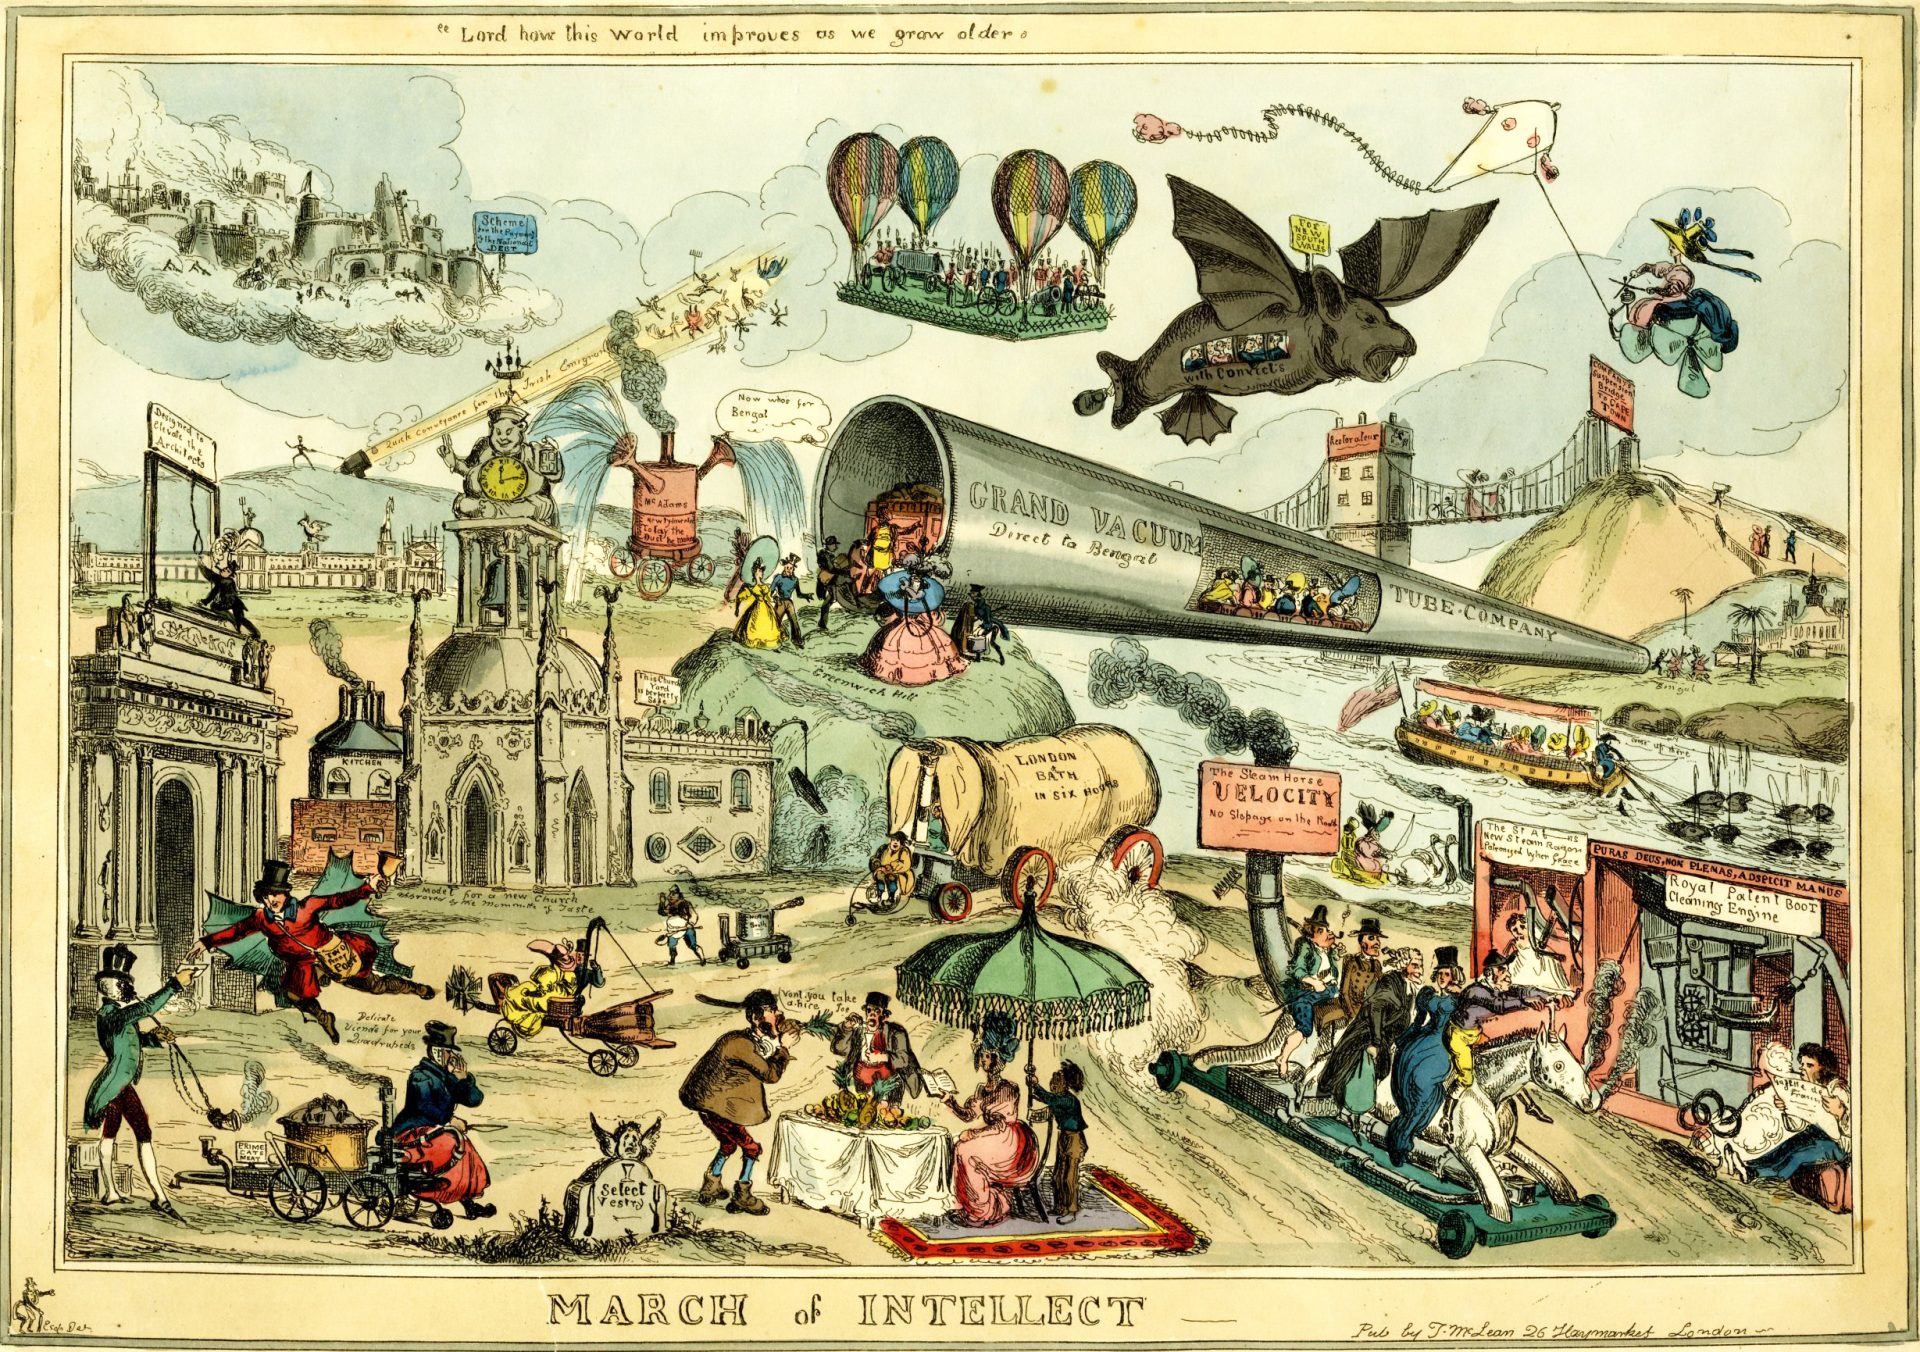 “March of Intellect” illustration celebrates the progress and innovation of humanity. The illustration is full of colorful and fantastical elements, such people flying using wings, and a giant grand vacuum tube transporting people. The sky is filled with clouds and flying creatures, some of whom are also carrying banners and signs. The note on top of the image reads “Look how the world improves as we grow older”, suggesting a positive and optimistic view of the future. The illustration is a creative and humorous representation of the human intellect and its achievements.